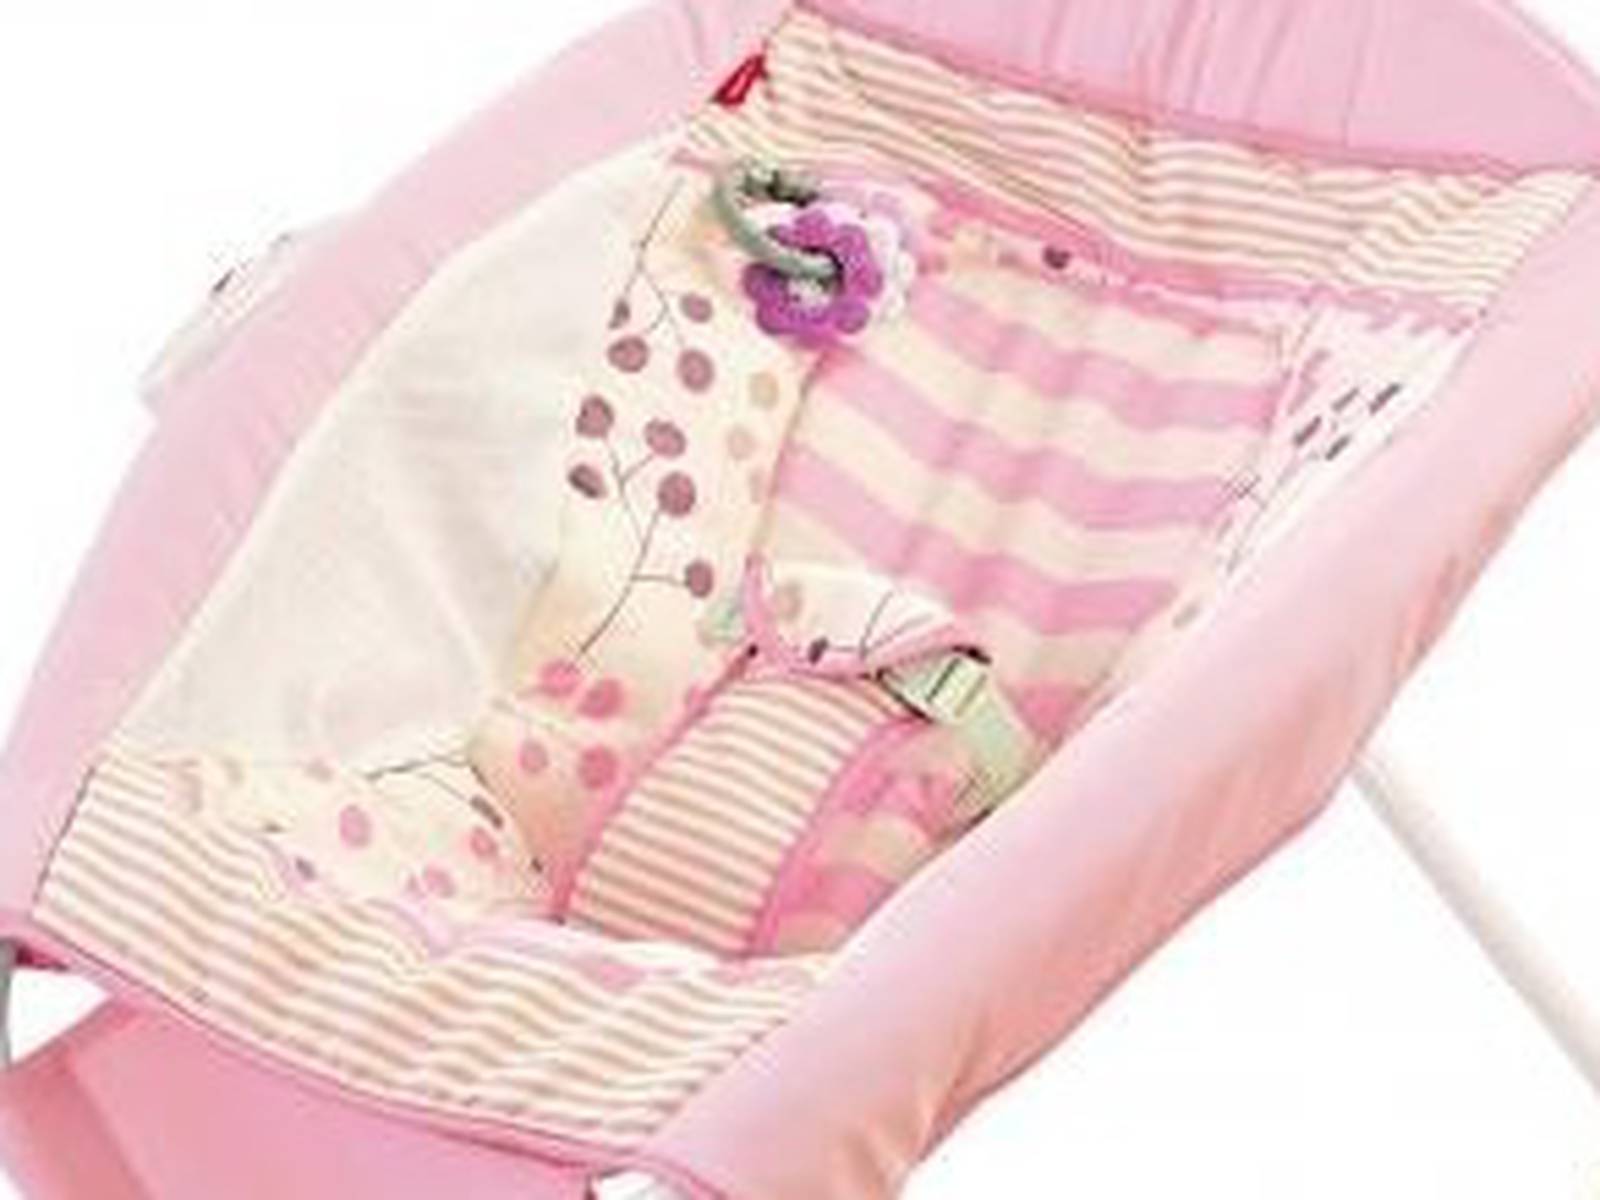 Fisher-Price Recalls Rock 'n Play Sleepers Due to Reports of